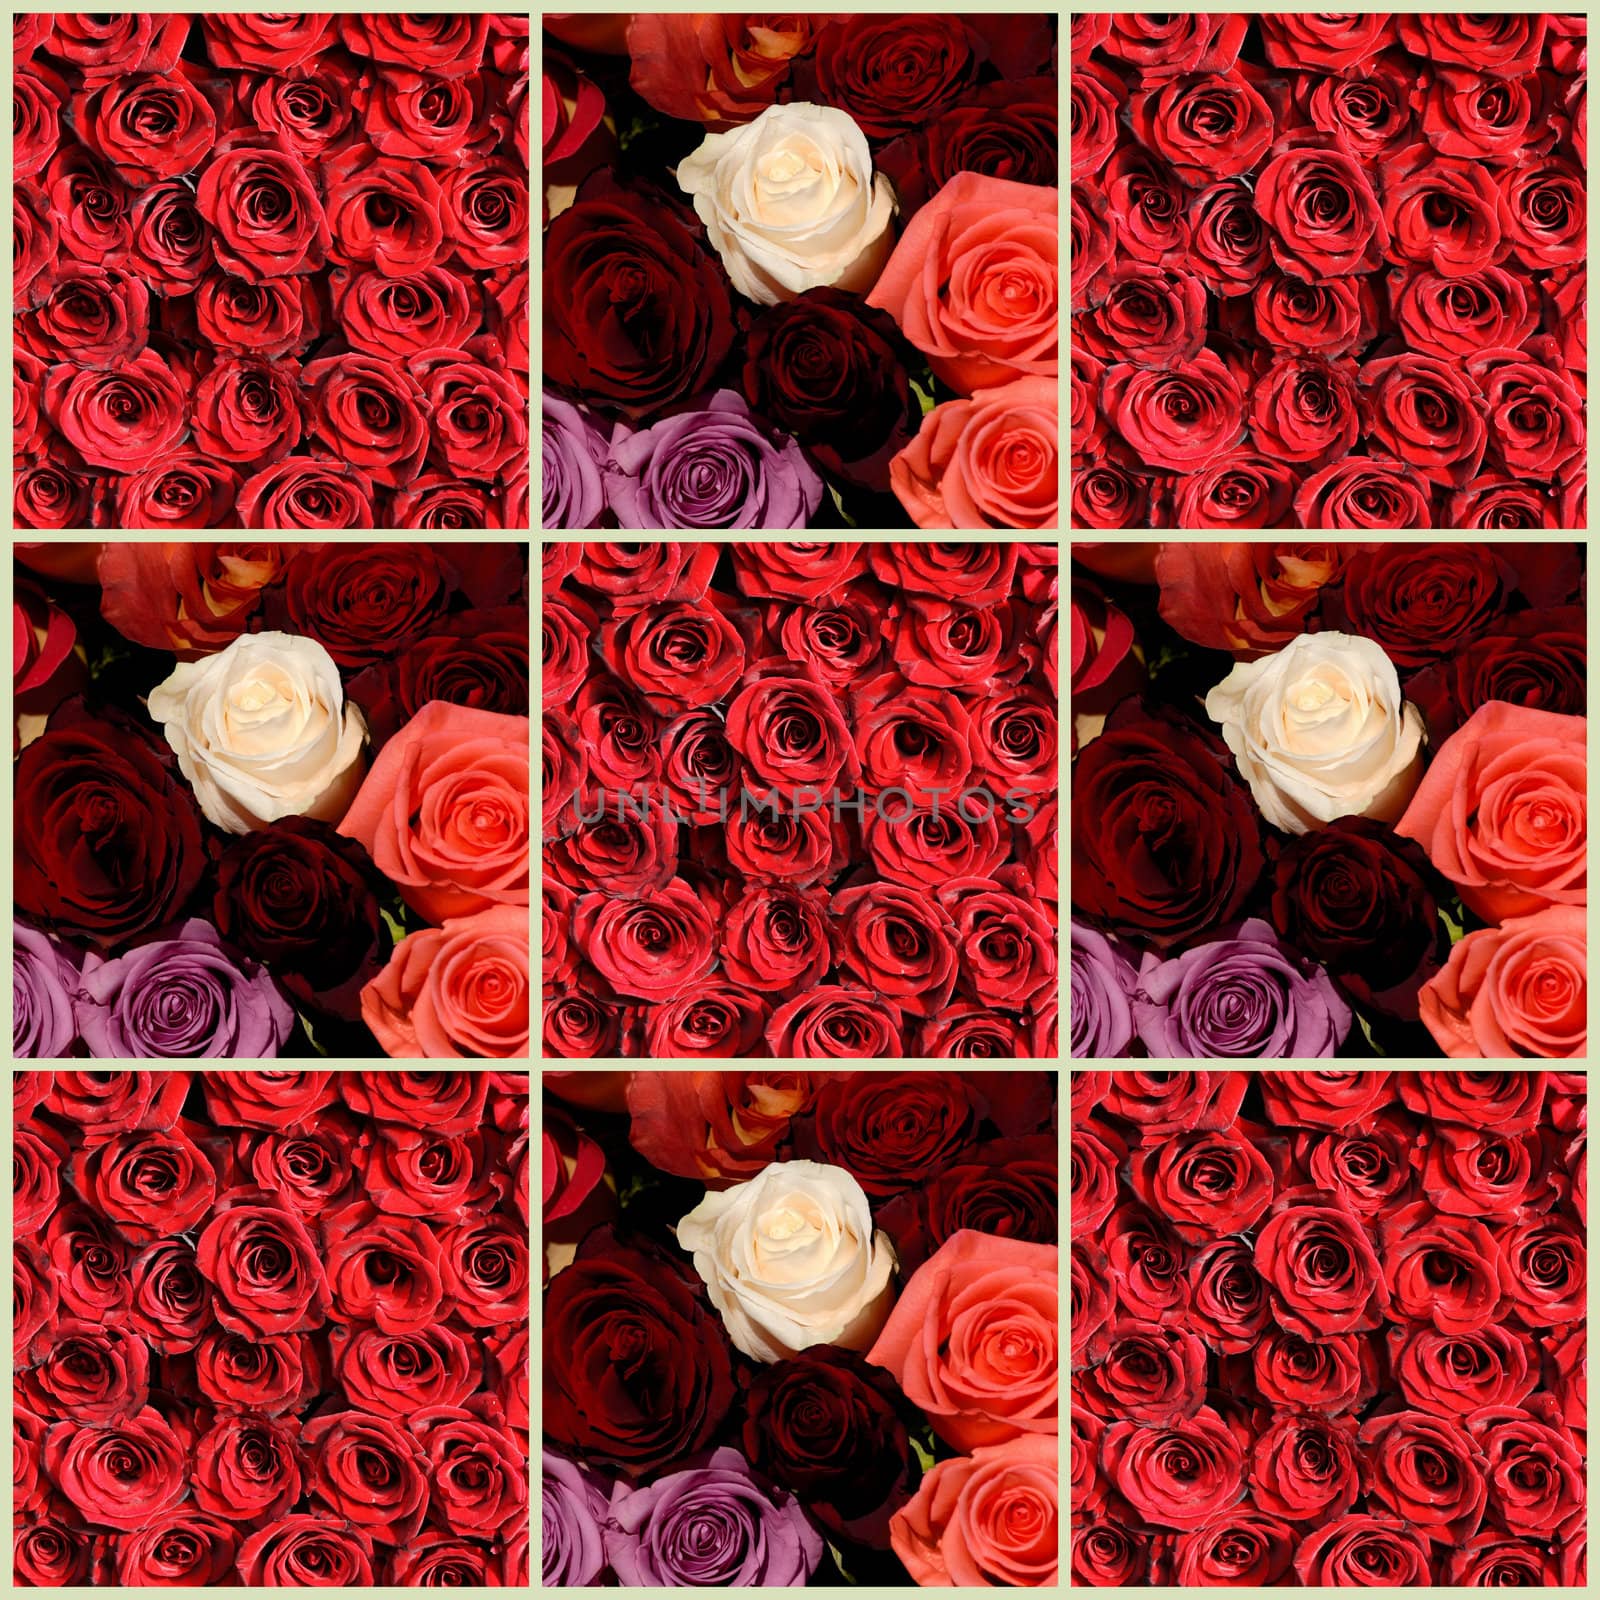 Collage of rose flowers  by Baltus